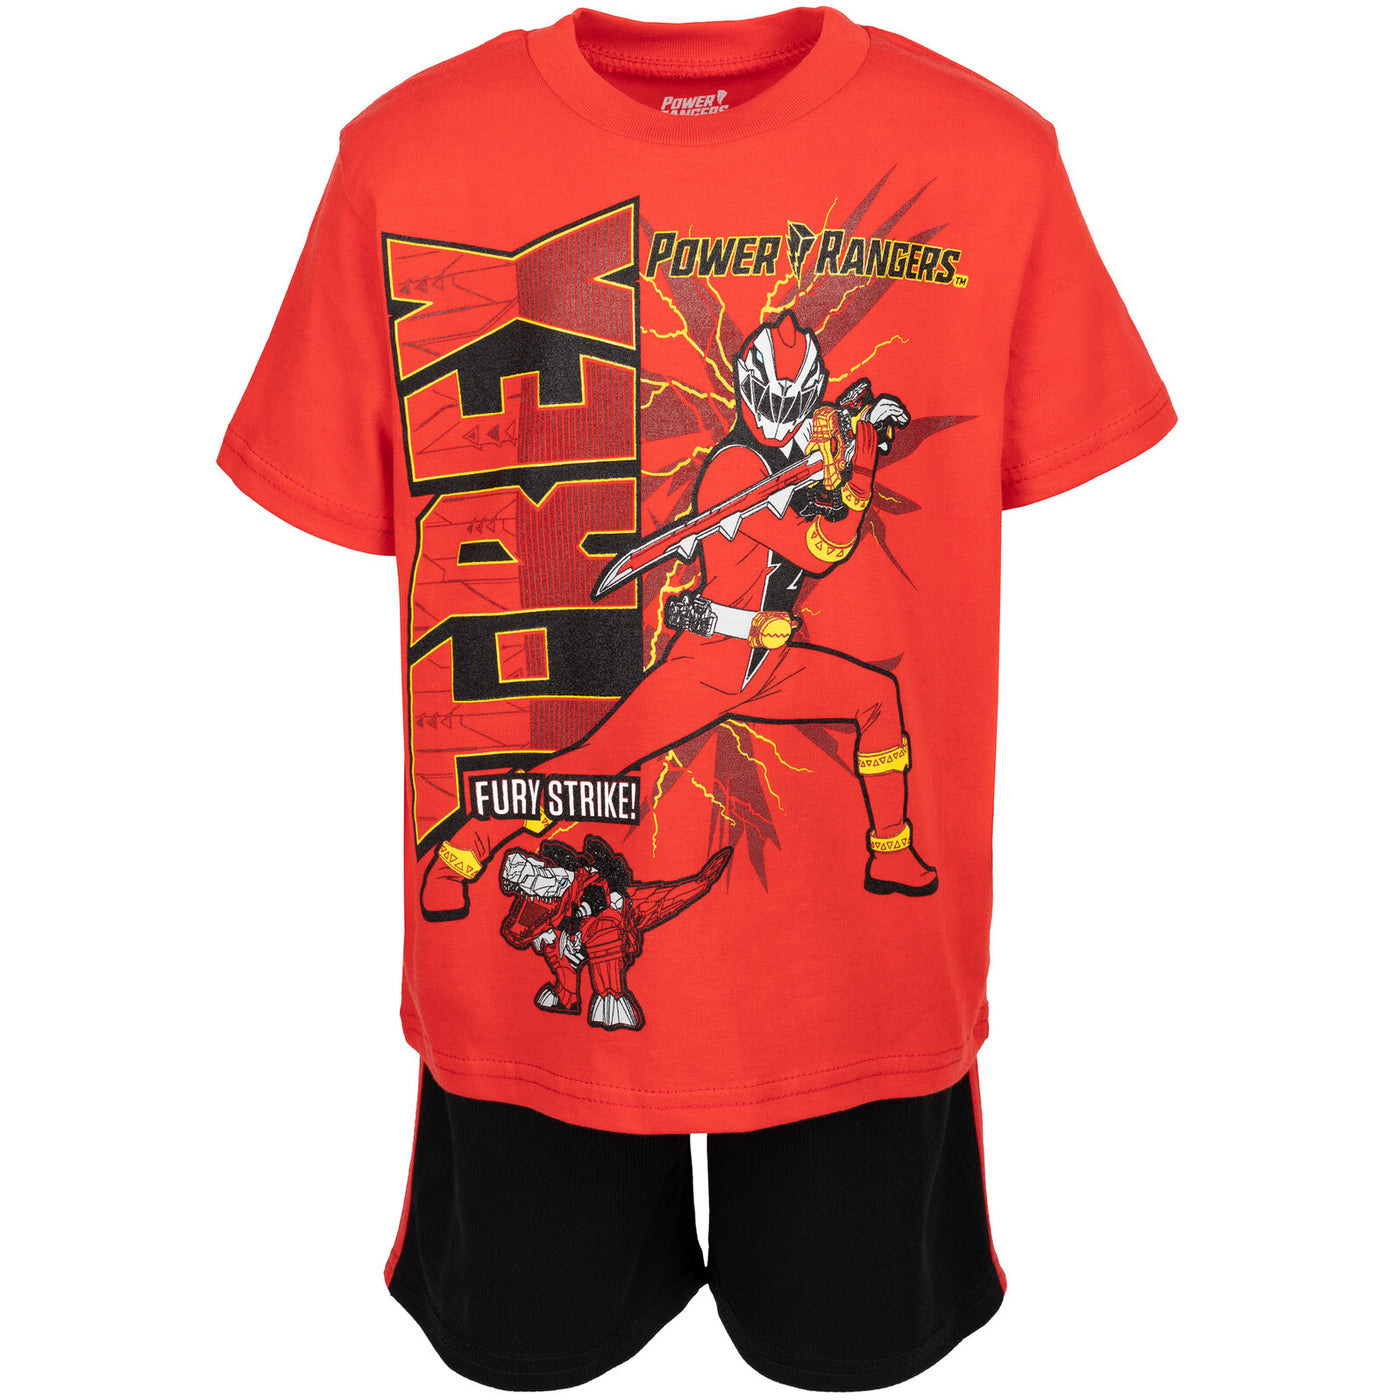 Power Rangers Red Ranger T-Shirt and Mesh Shorts Outfit Set